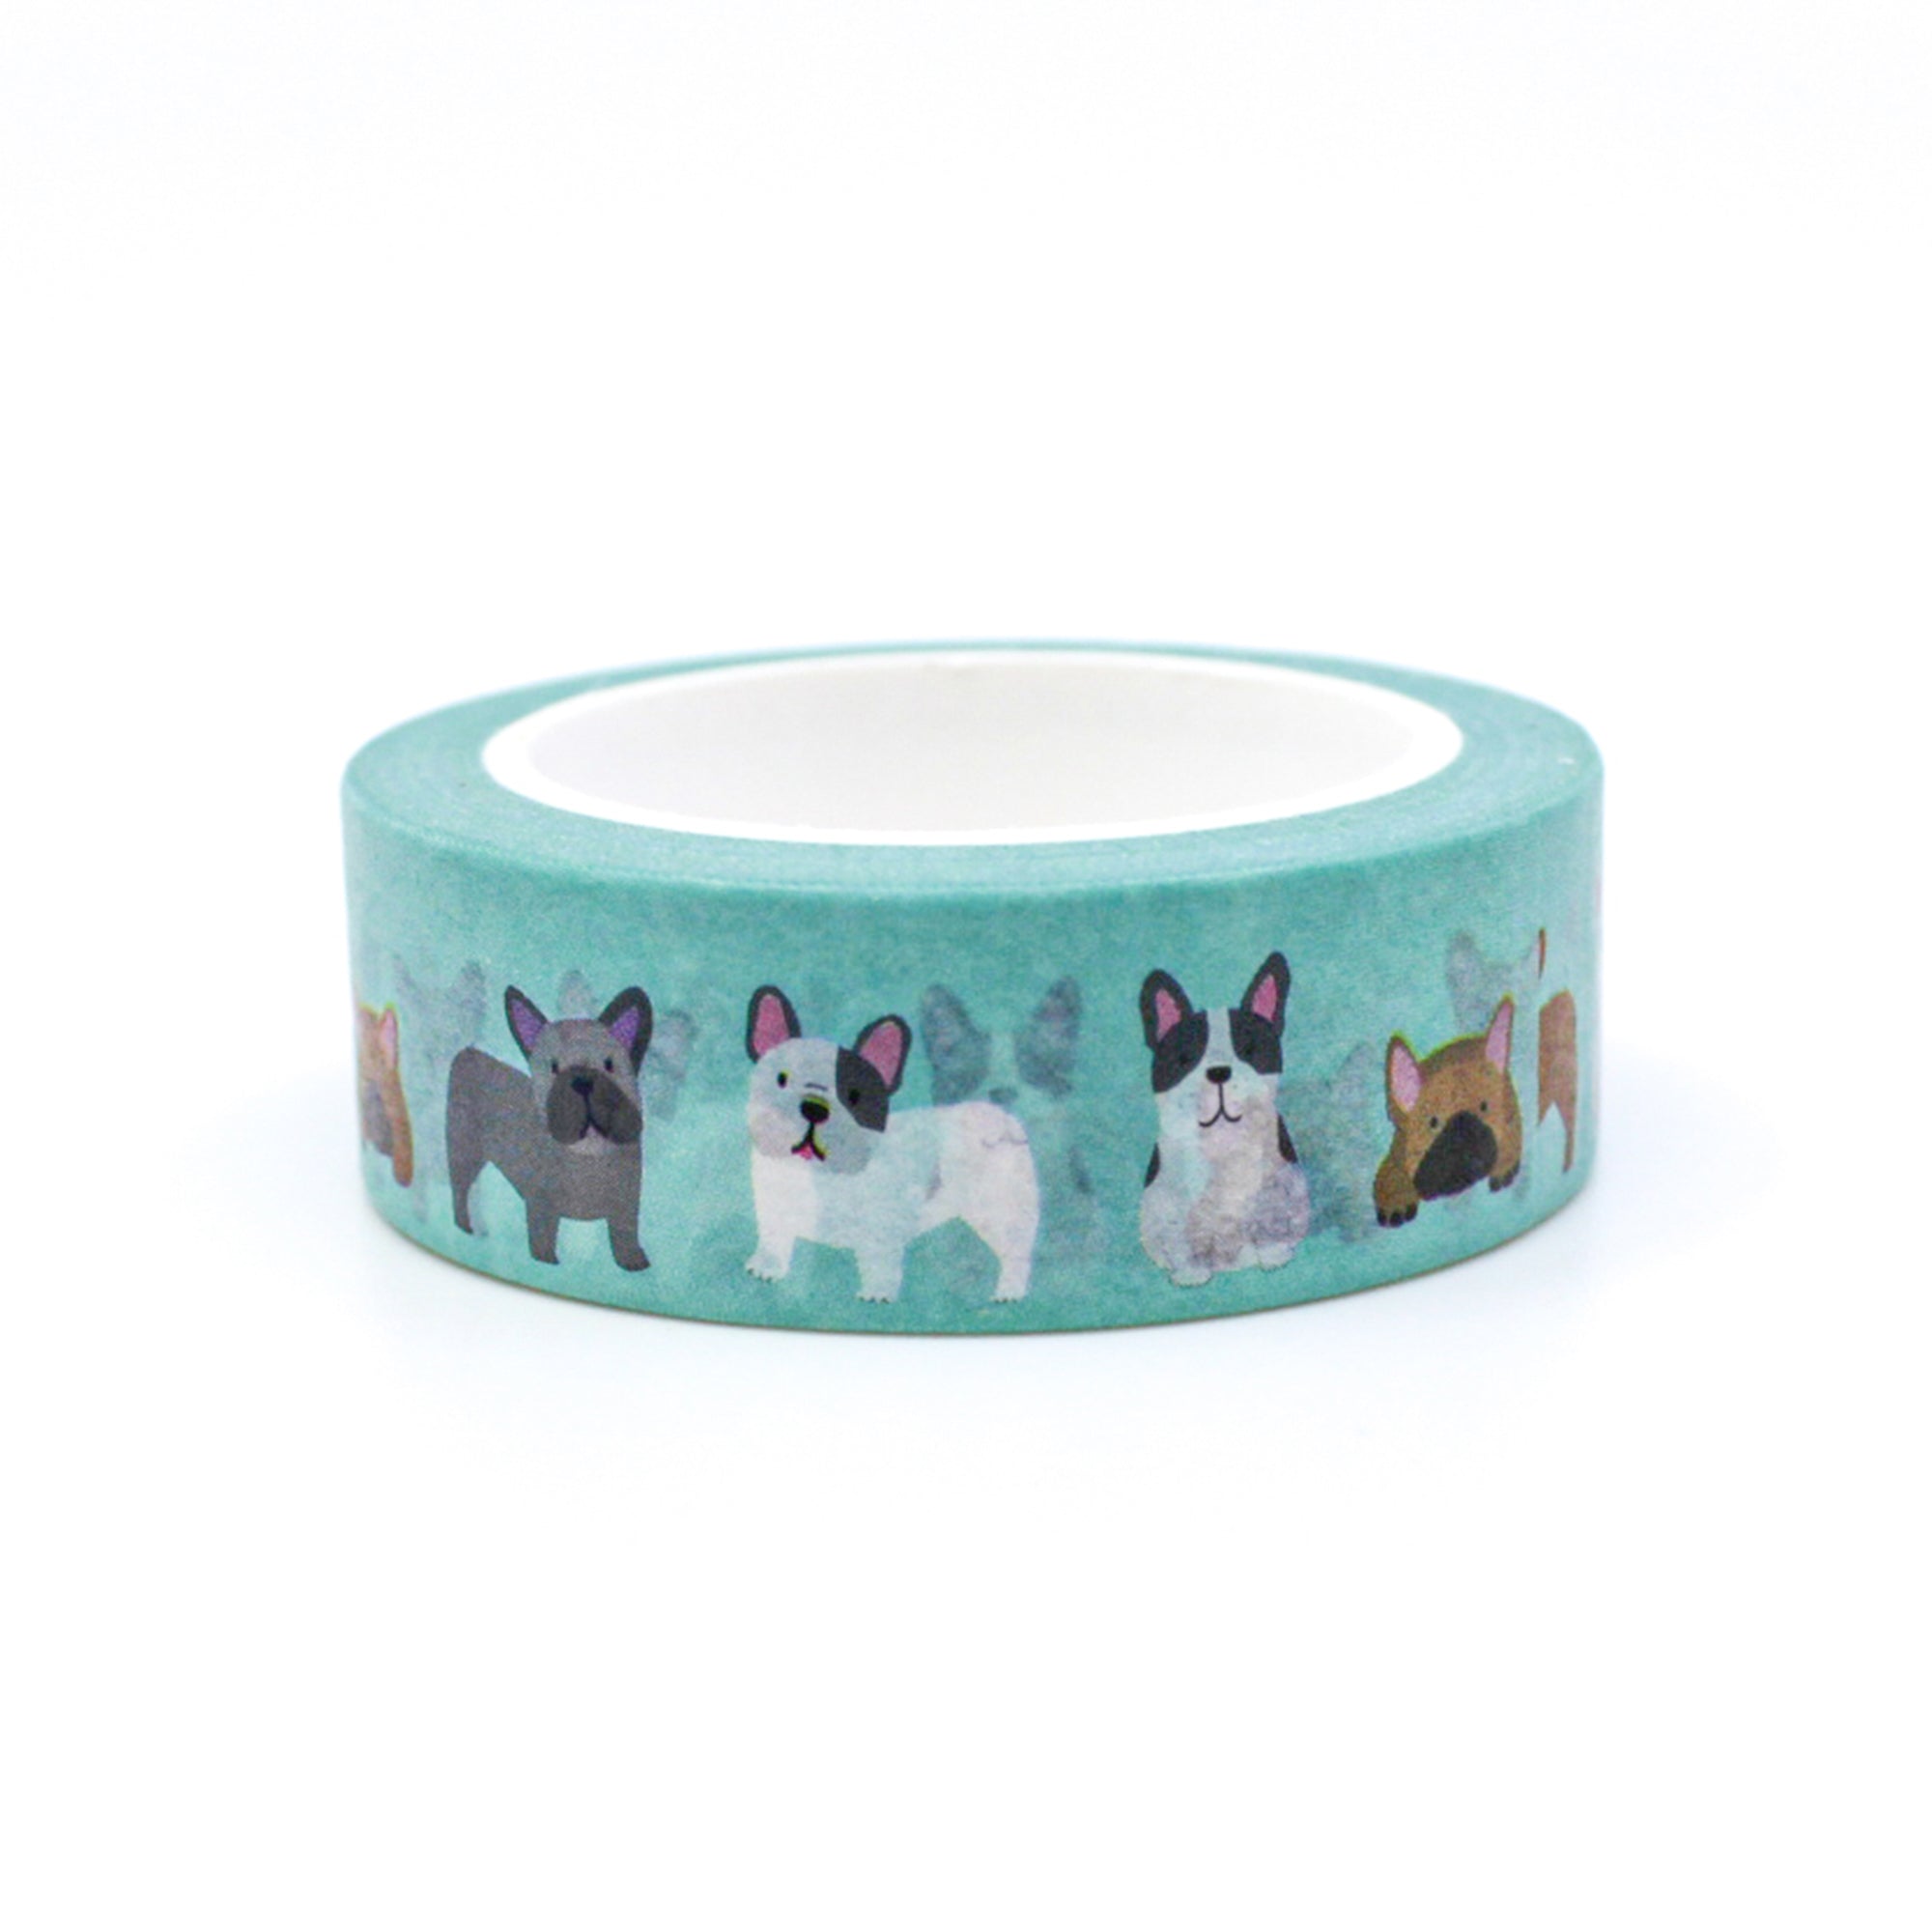 Embrace canine cuteness with our French Bulldog Washi Tape, featuring adorable French Bulldog illustrations. Ideal for adding a playful and dog-loving touch to your projects. This tape from Girl of All Work is sold at BBB Supplies Craft Shop.